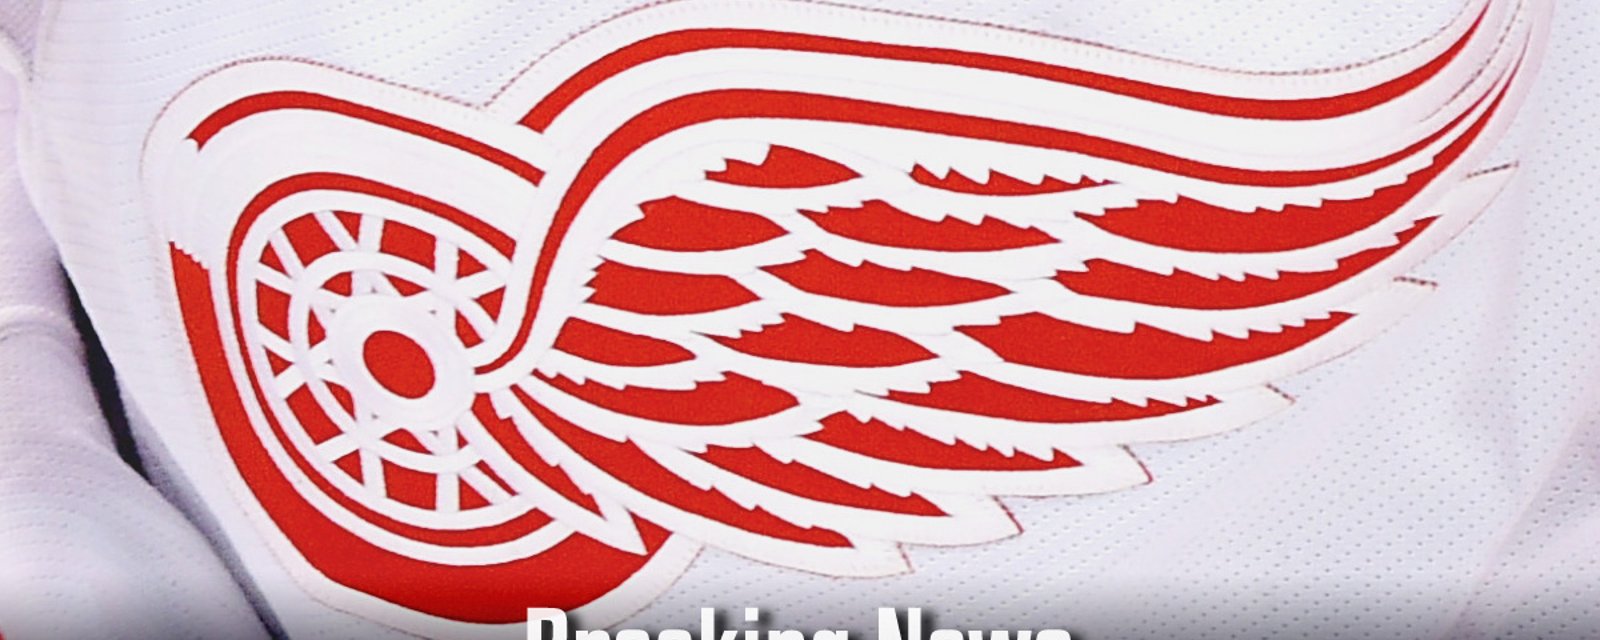 Breaking News : Conference rival claims Red Wings defenceman.